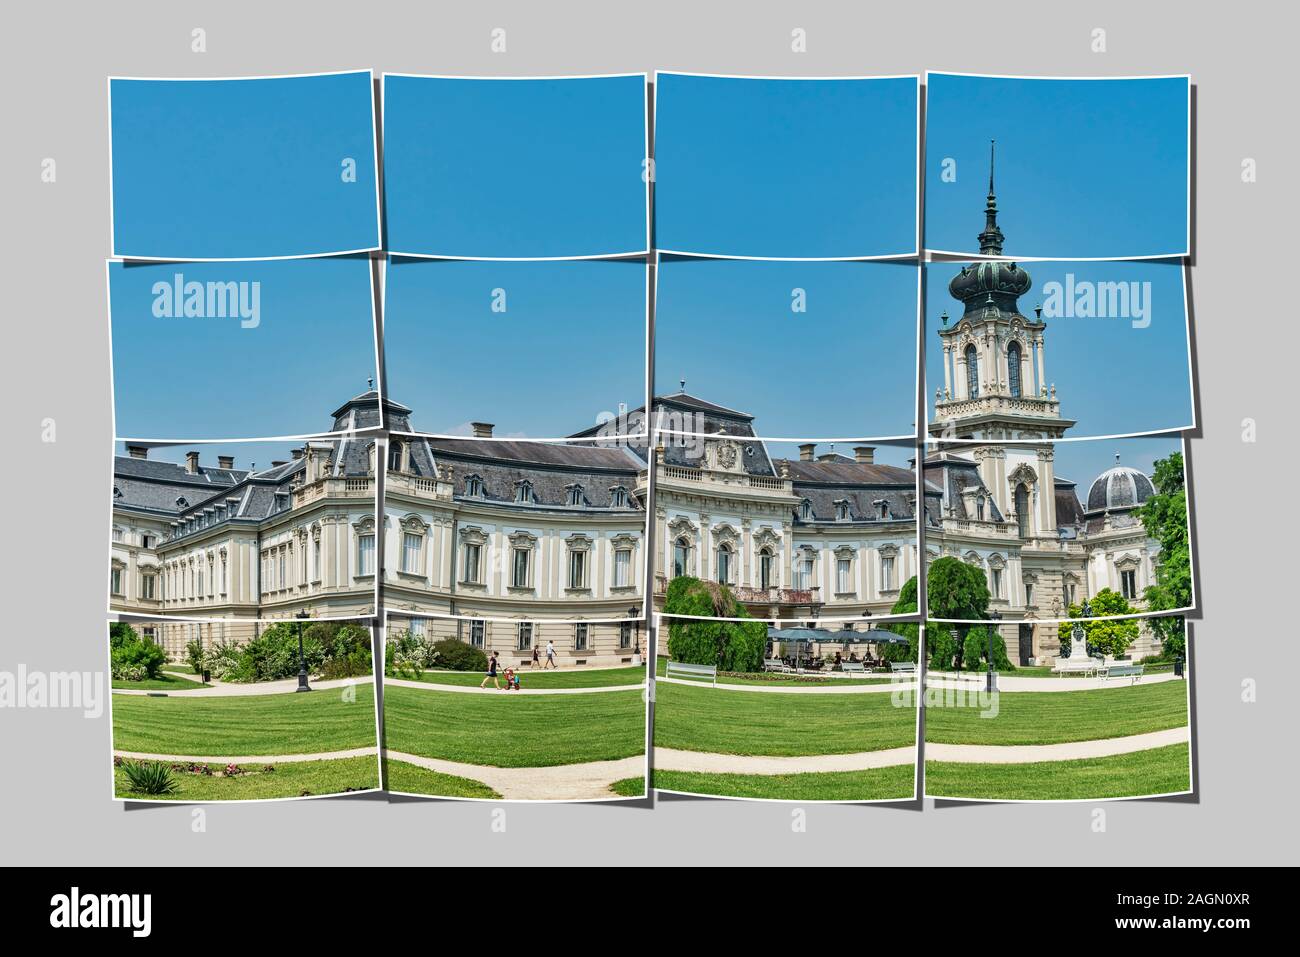 The Festetics Palace is a Baroque palace located in the town of Keszthely, Zala county, Hungary, Europe. Stock Photo